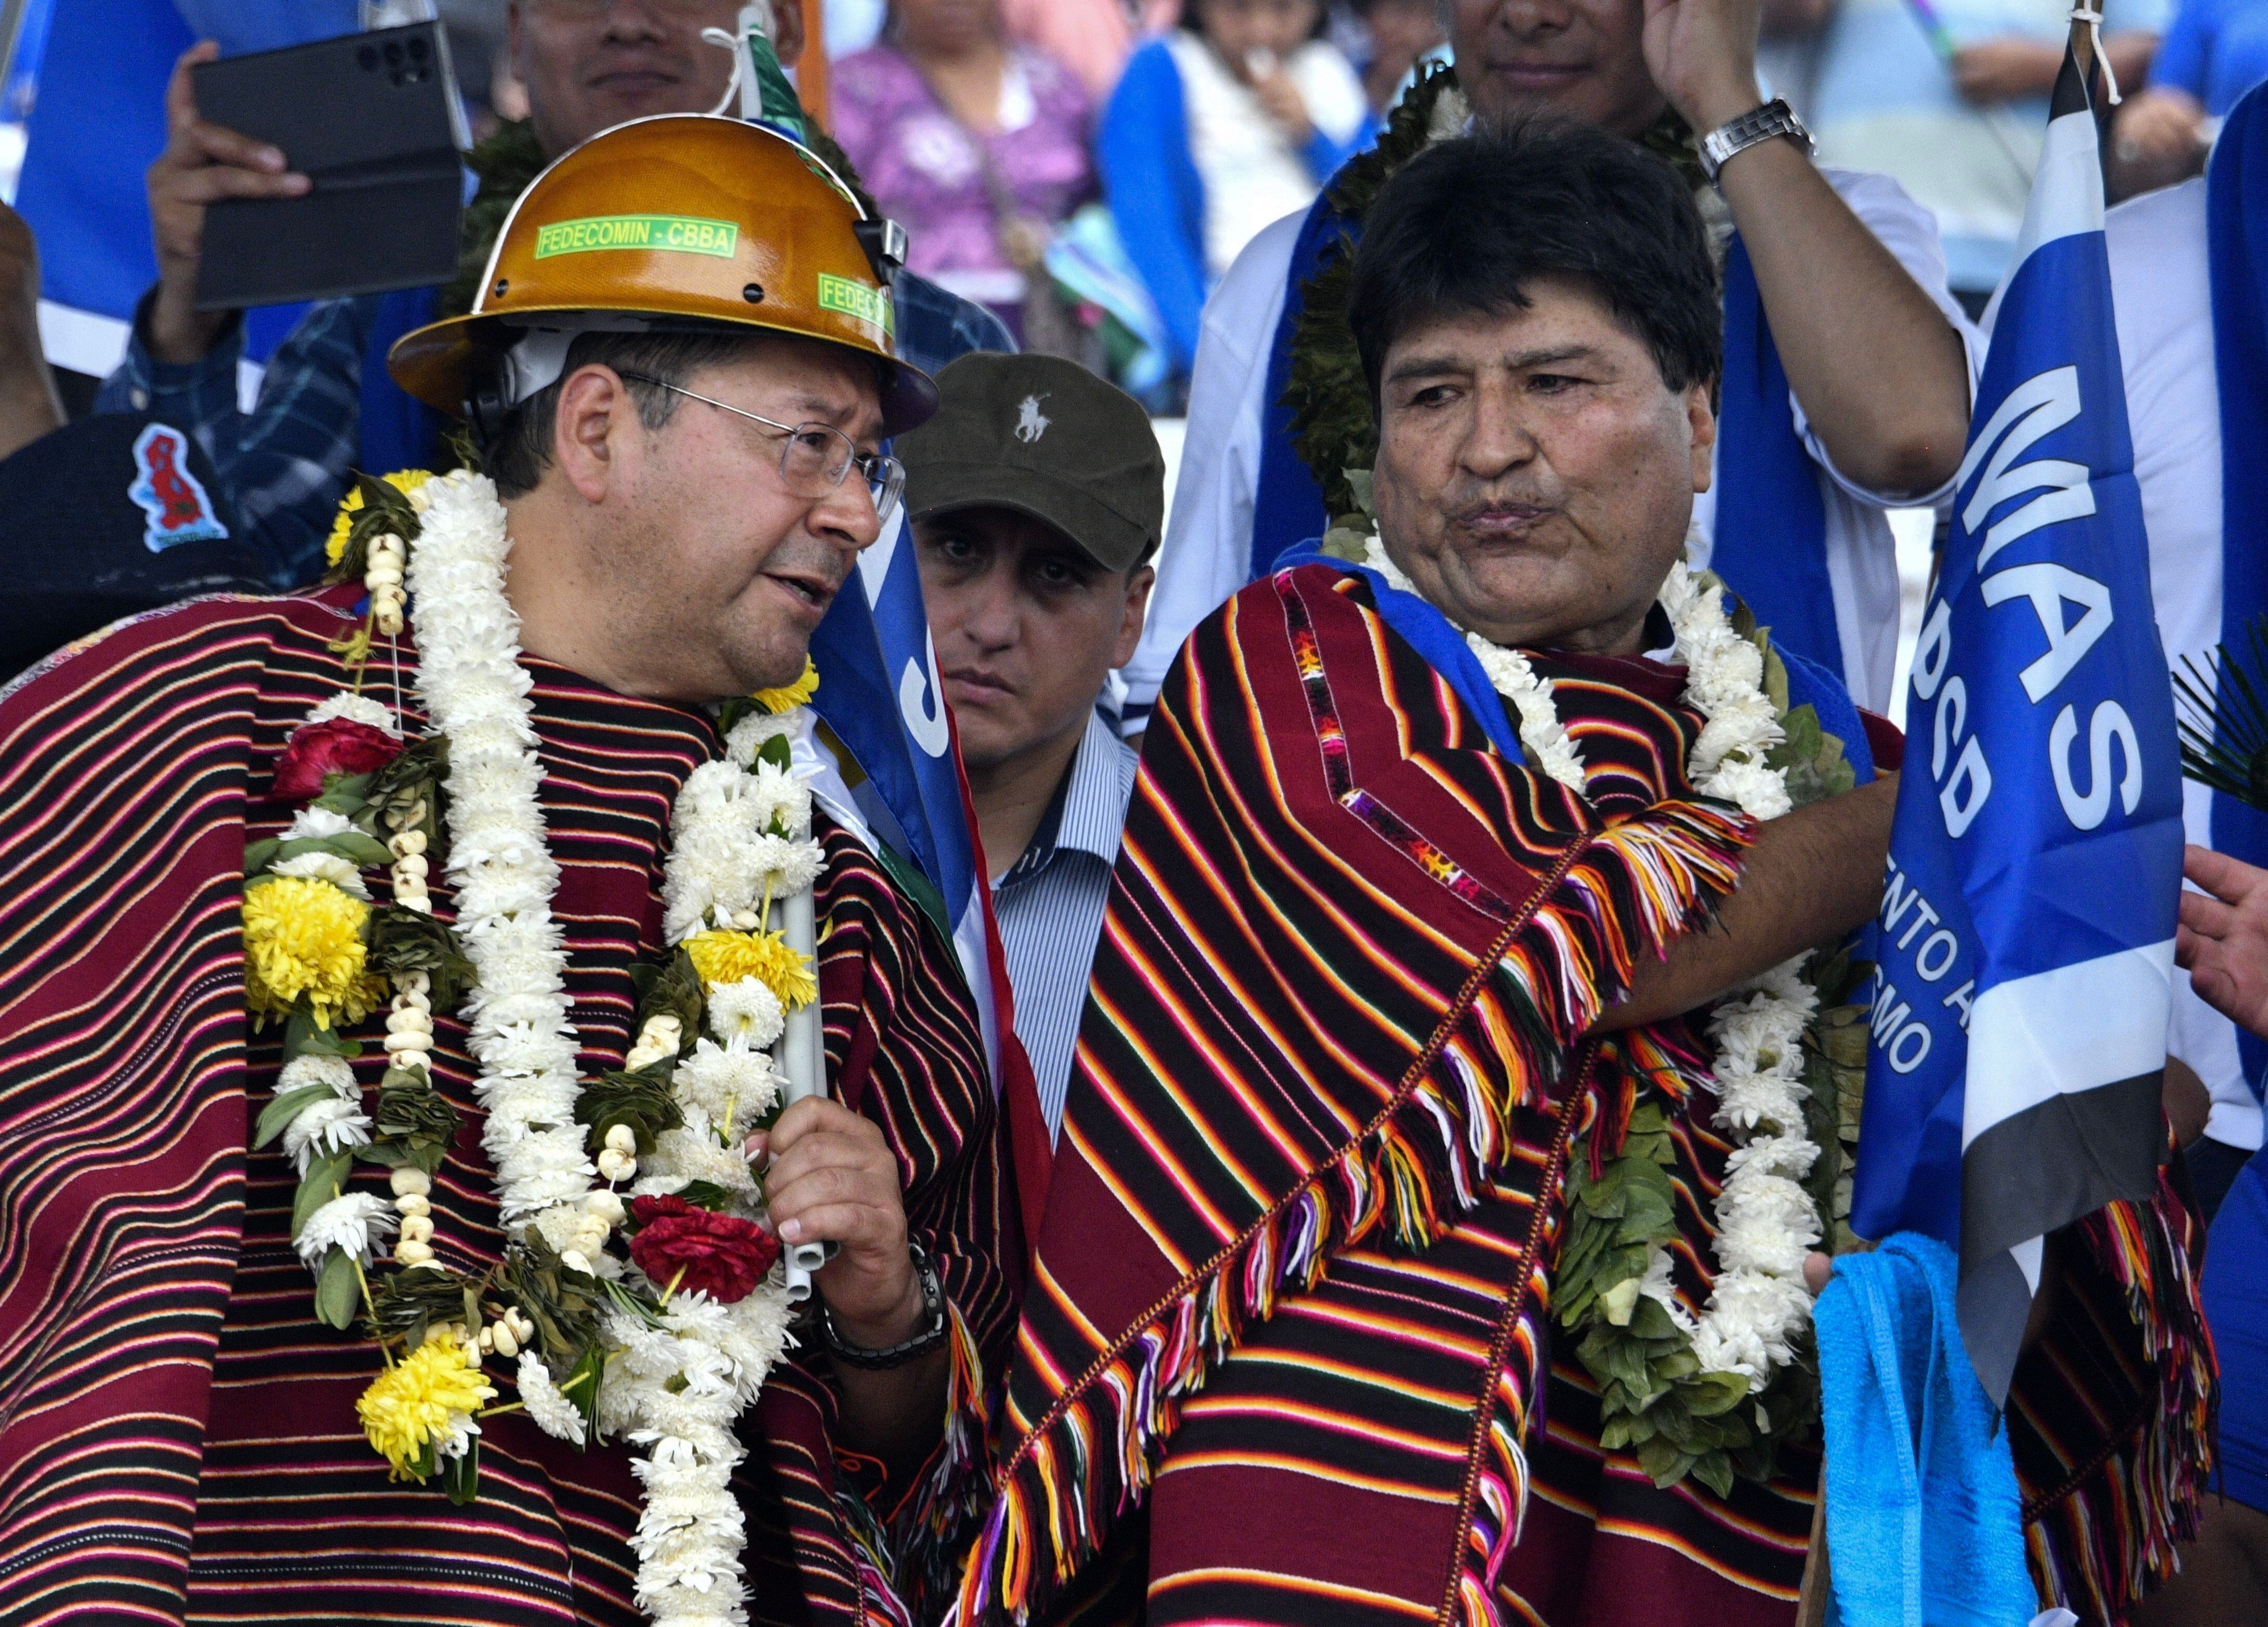 Bolivian President Luis Arce and former President Evo Morales, wearing garlands of flowers and coca leaves, speak during a political meeting to mark the 28th anniversary of MAS, on March 26, 2023. (Photo by Aizar RALDES / AFP).